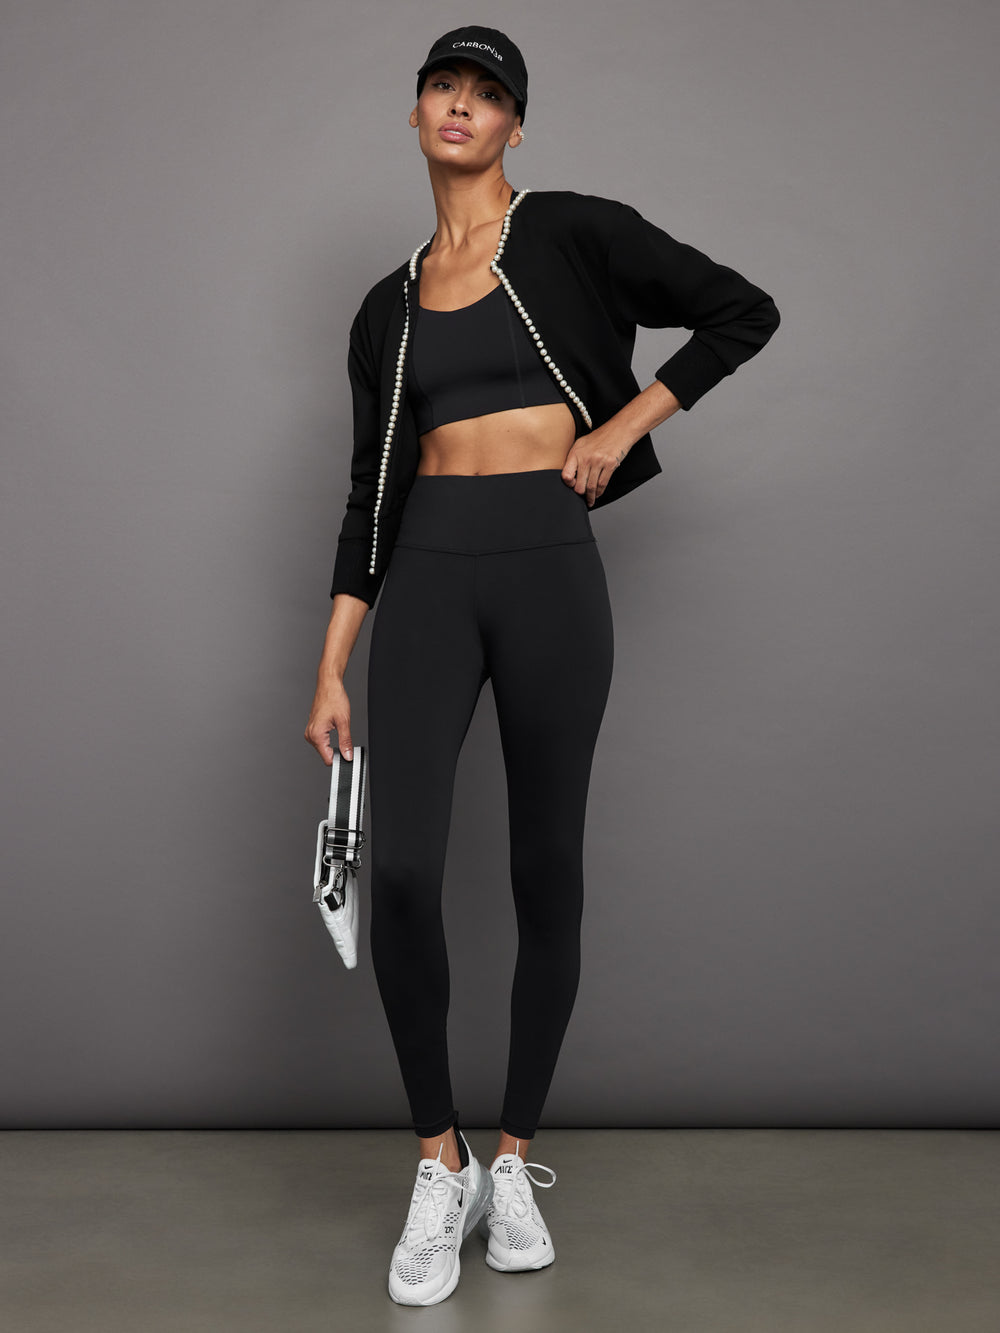 Upgrade Your Basic Black Leggings With Carbon38's New In-House